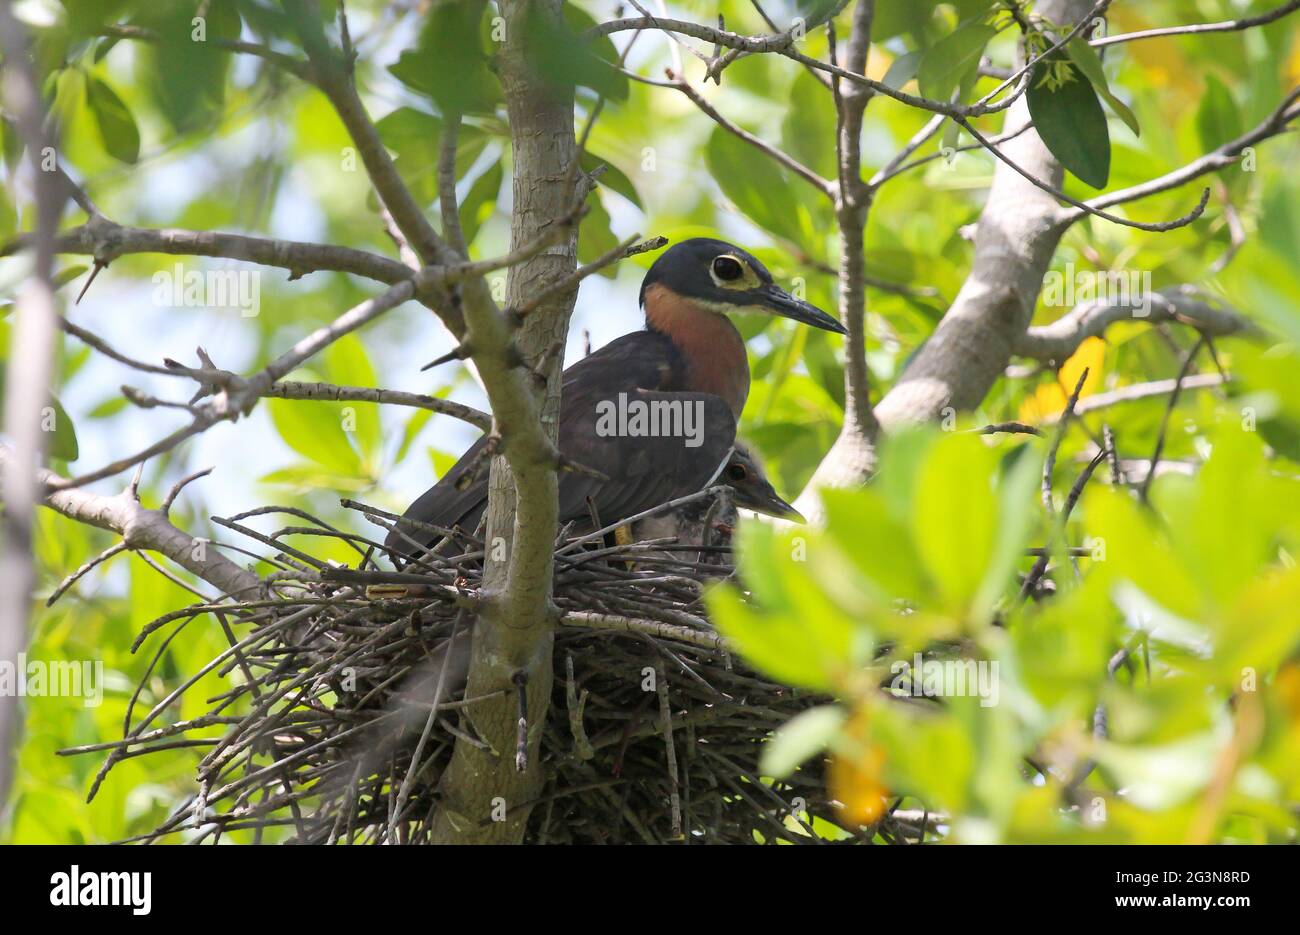 Bird nesting in a tree, protecting it's young Stock Photo